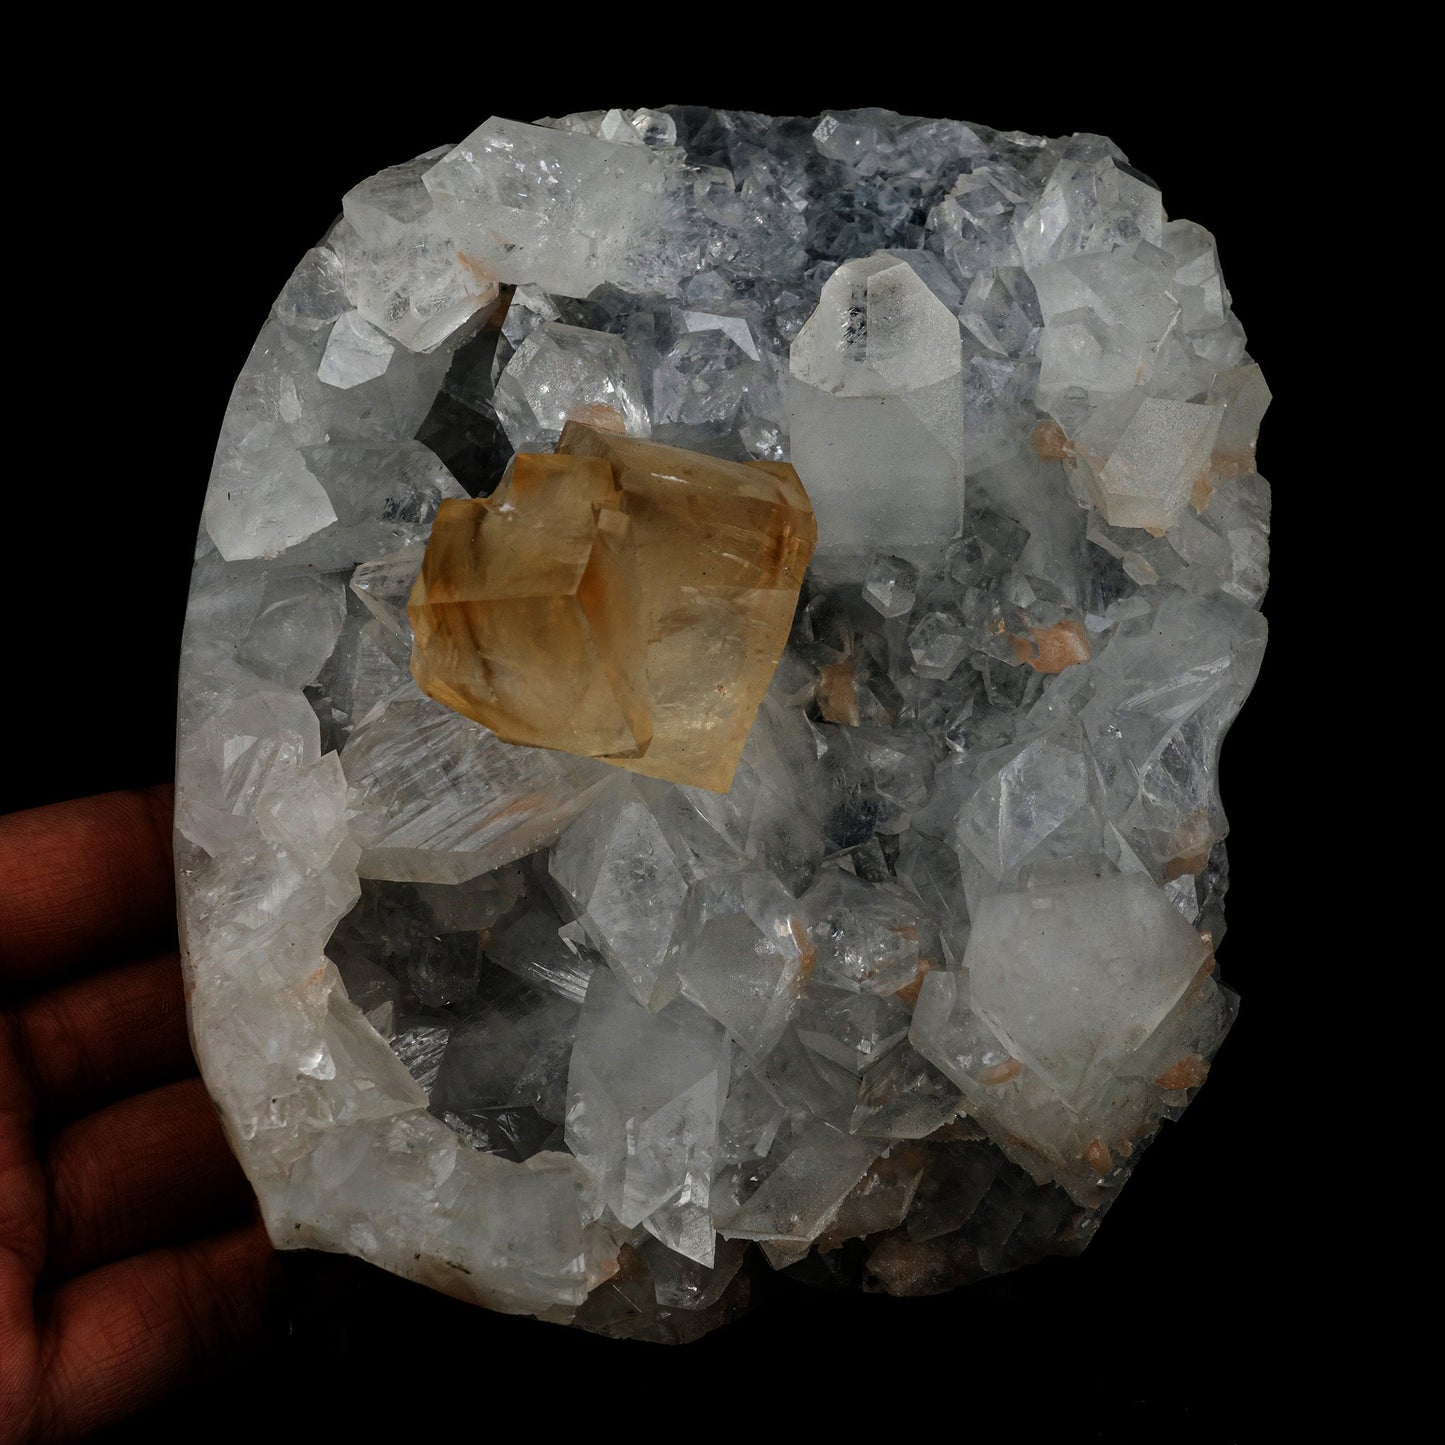 Golden Calcite with Apophyllite Natural Mineral Specimen # B 5170  https://www.superbminerals.us/products/golden-calcite-with-apophyllite-natural-mineral-specimen-b-5170  Features: An extremely aesthetic piece that features a matrix Coated Calcite hosting a couple of complex, lustrous, water clear Calcite crystal with intersecting, perfectly formed pink-orange Stilbite crystals. The crystal formation, color, contrast, luster and symmetry are amazing! It also stands on its own. In excell